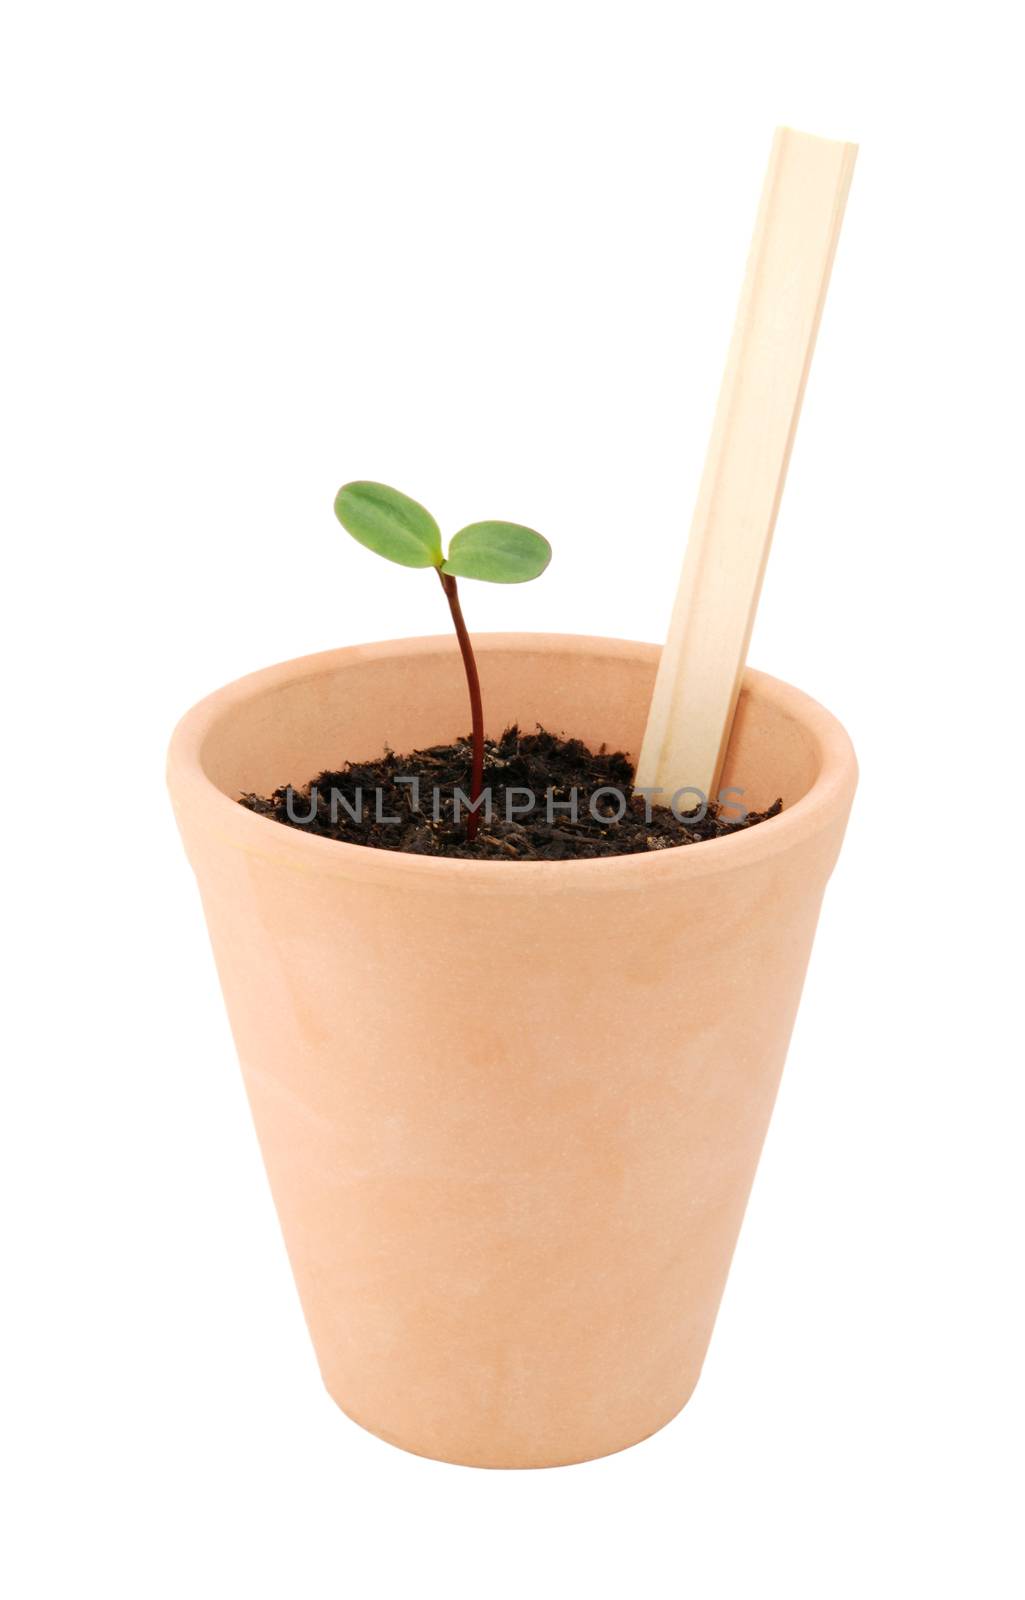 Seedling grows in a terracotta flowerpot with a blank plant label ready for your own title, isolated on a white background